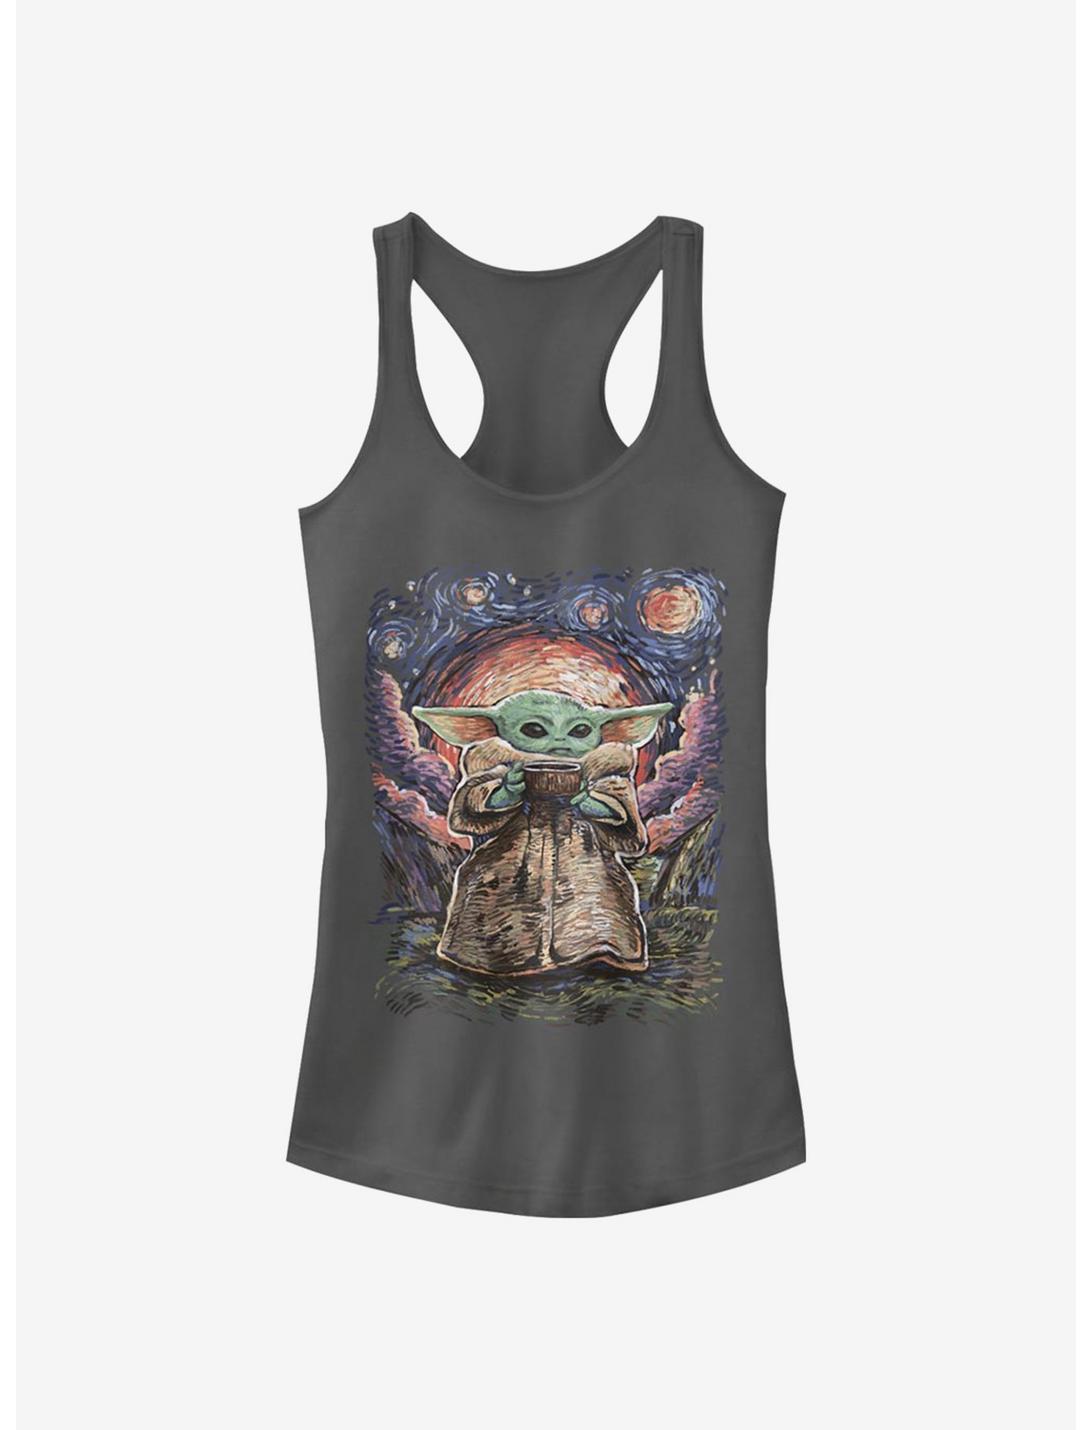 Star Wars The Mandalorian The Child Sipping Night Sky Girls Tank, CHARCOAL, hi-res